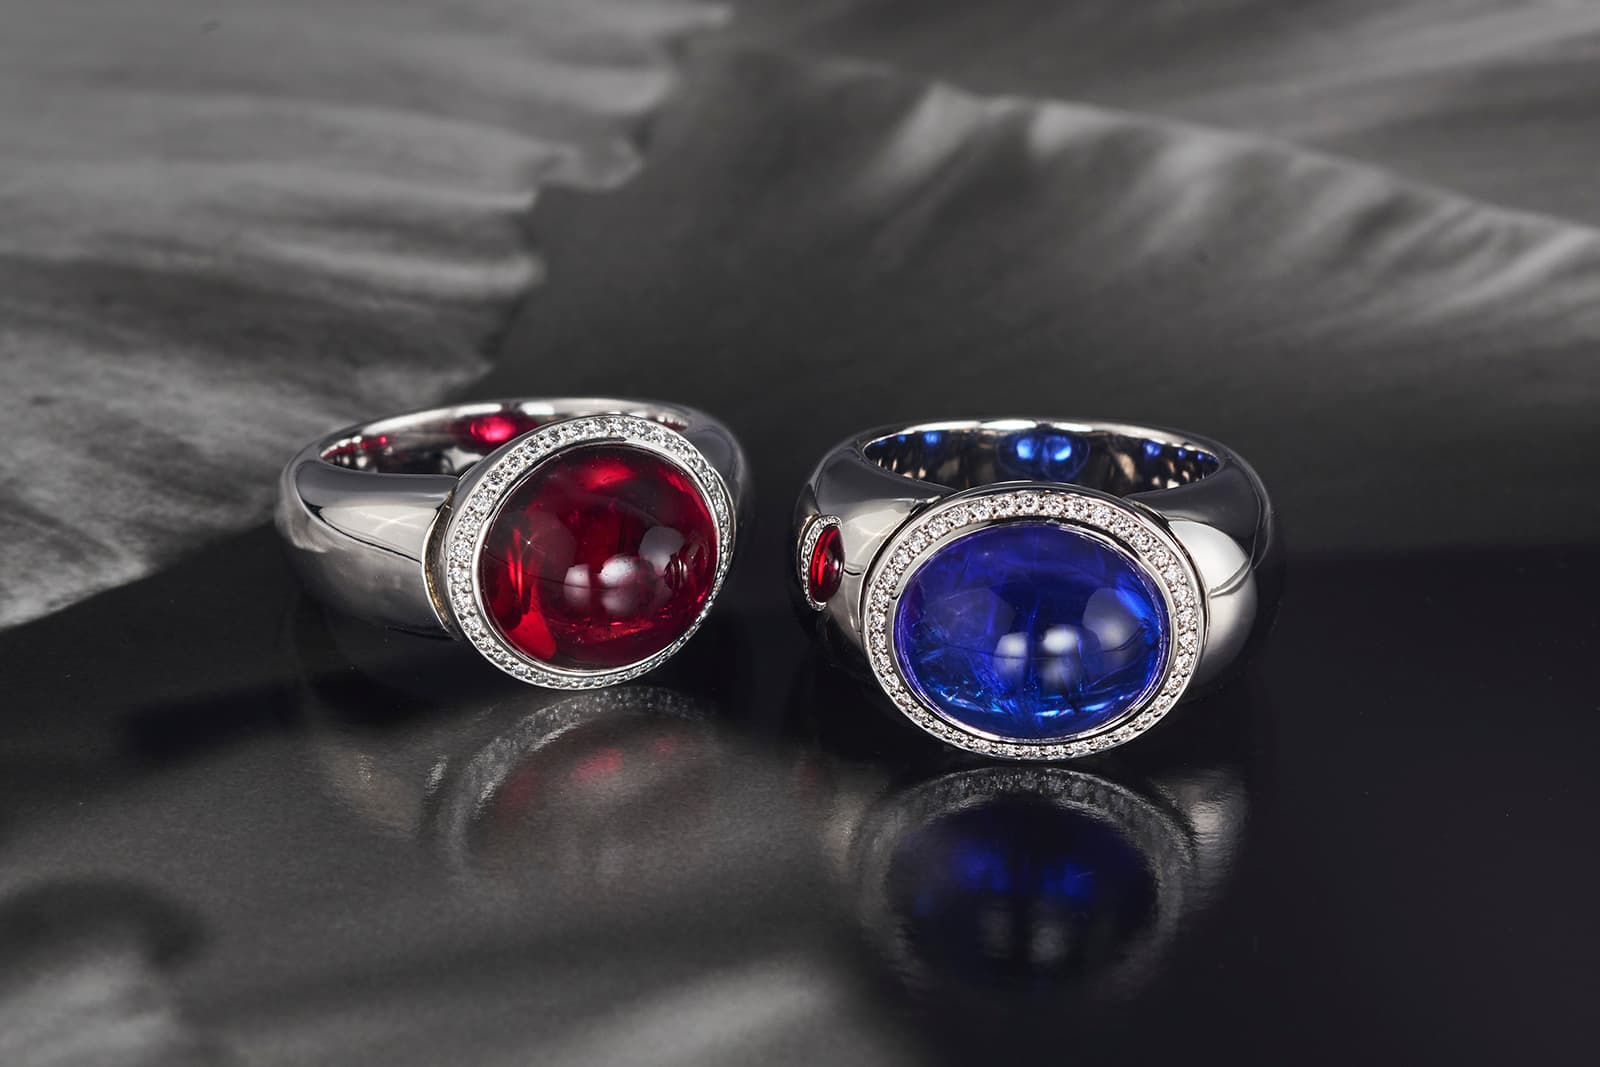 Leyser rings showcasing magnificent coloured gems - a cabochon rubellite and tanzanite 